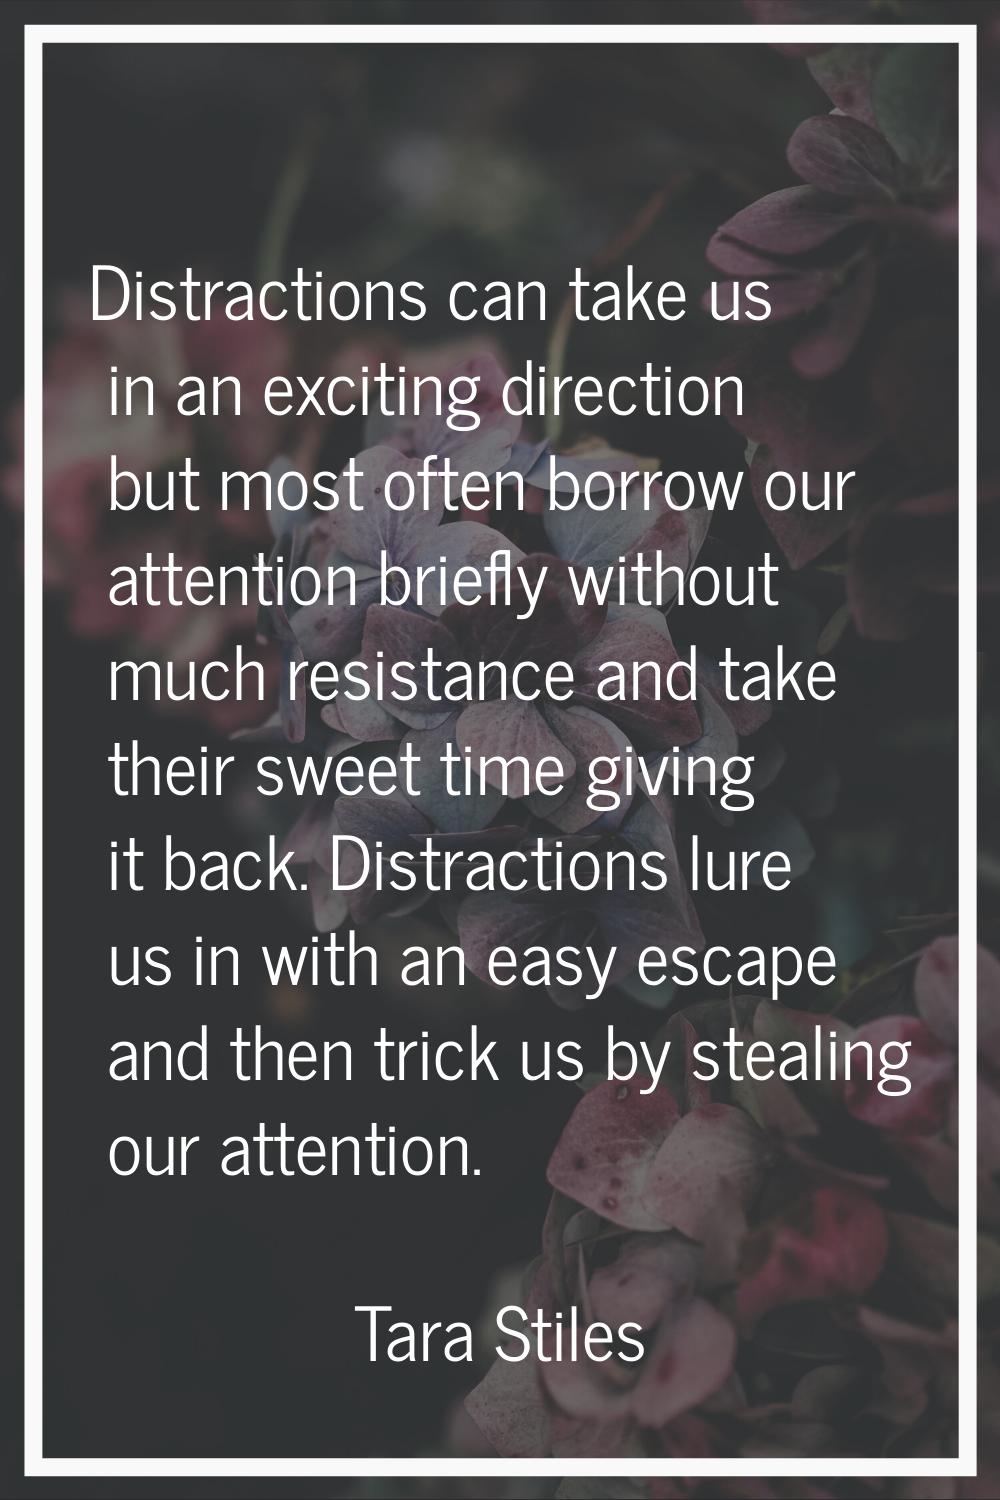 Distractions can take us in an exciting direction but most often borrow our attention briefly witho